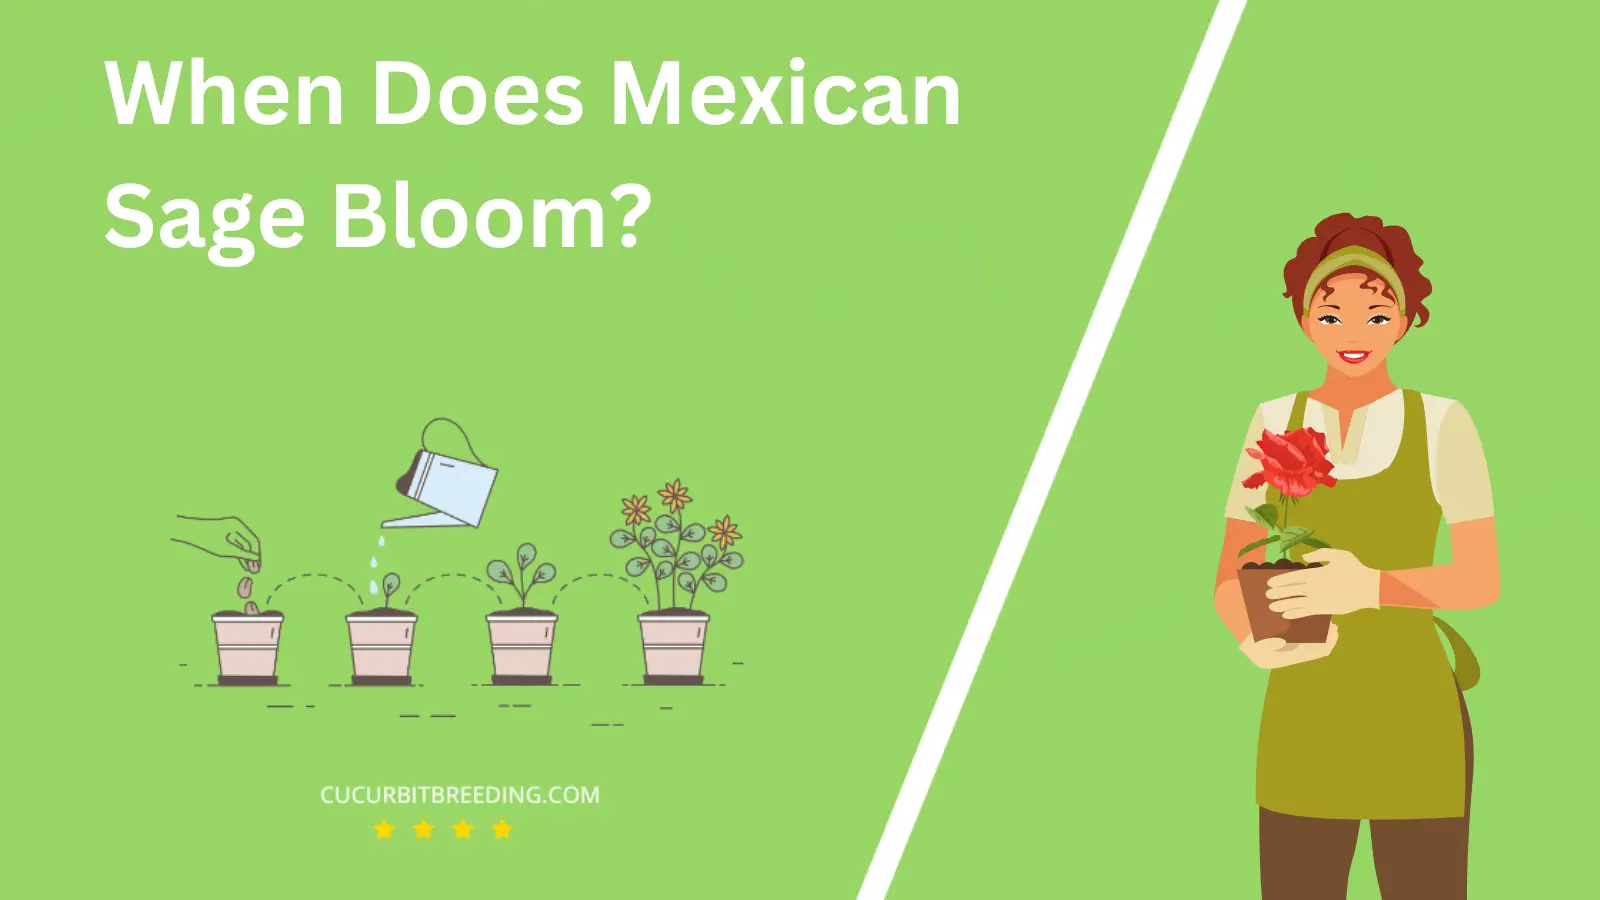 When Does Mexican Sage Bloom?